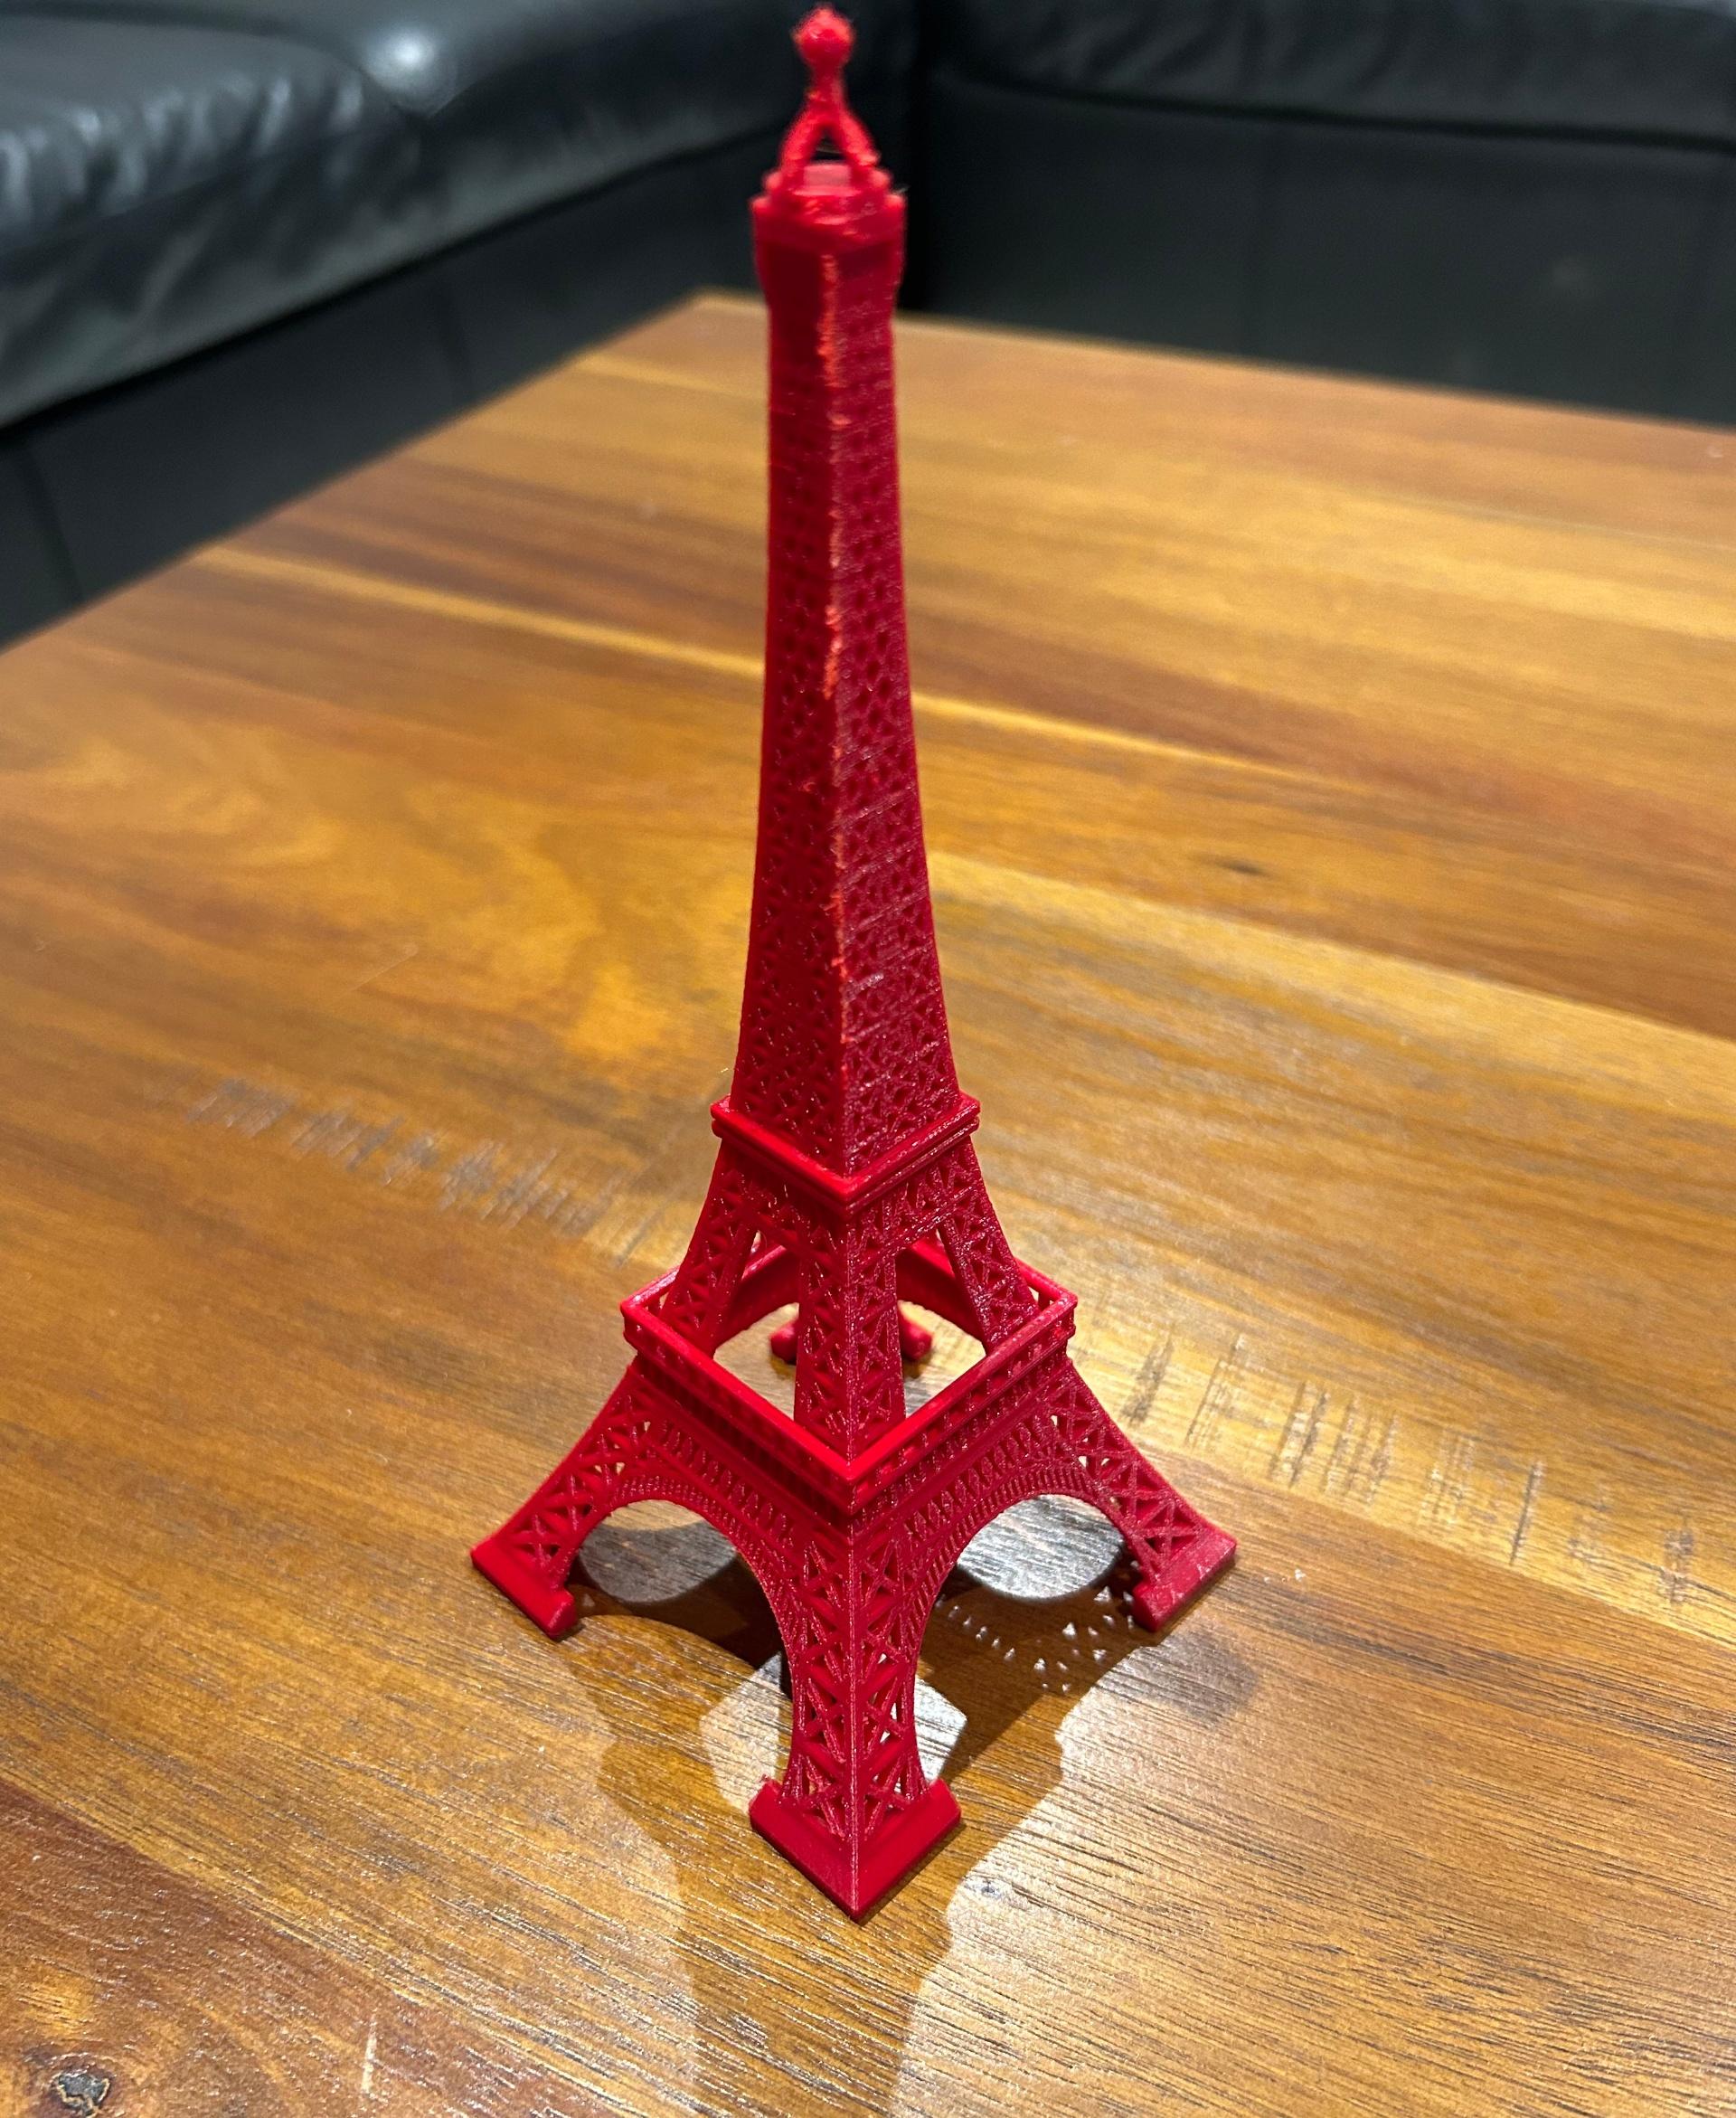 Eiffel Tower support free 3D Printable - Printed it on my channel!
https://www.youtube.com/watch?v=FWhZCUWI6pg
 - 3d model